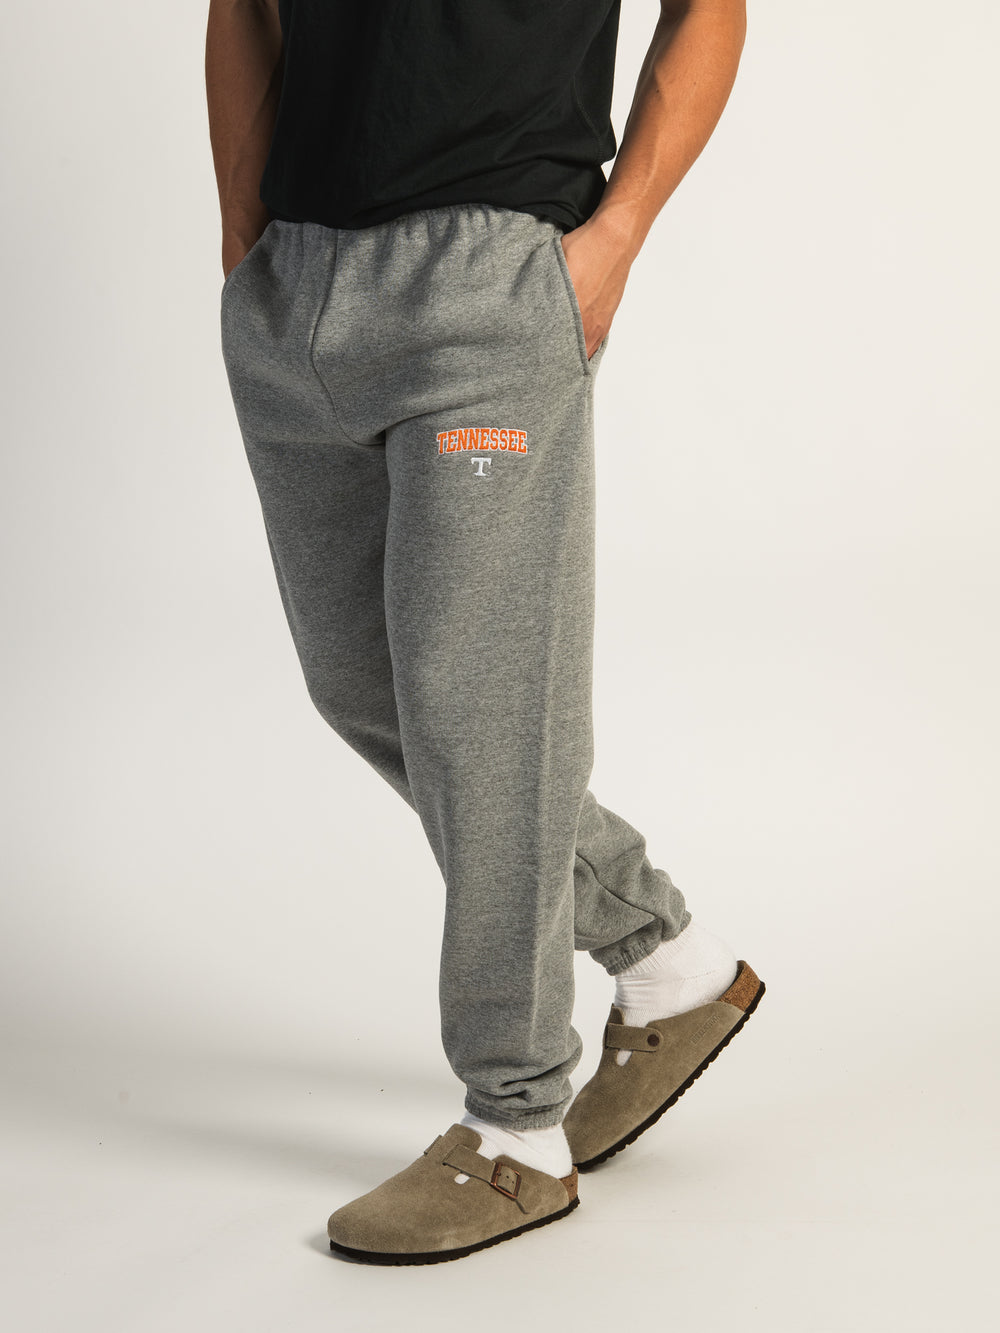 Russell Athletic Sweatpants Apparel, Buy Russell Athletic Clothing